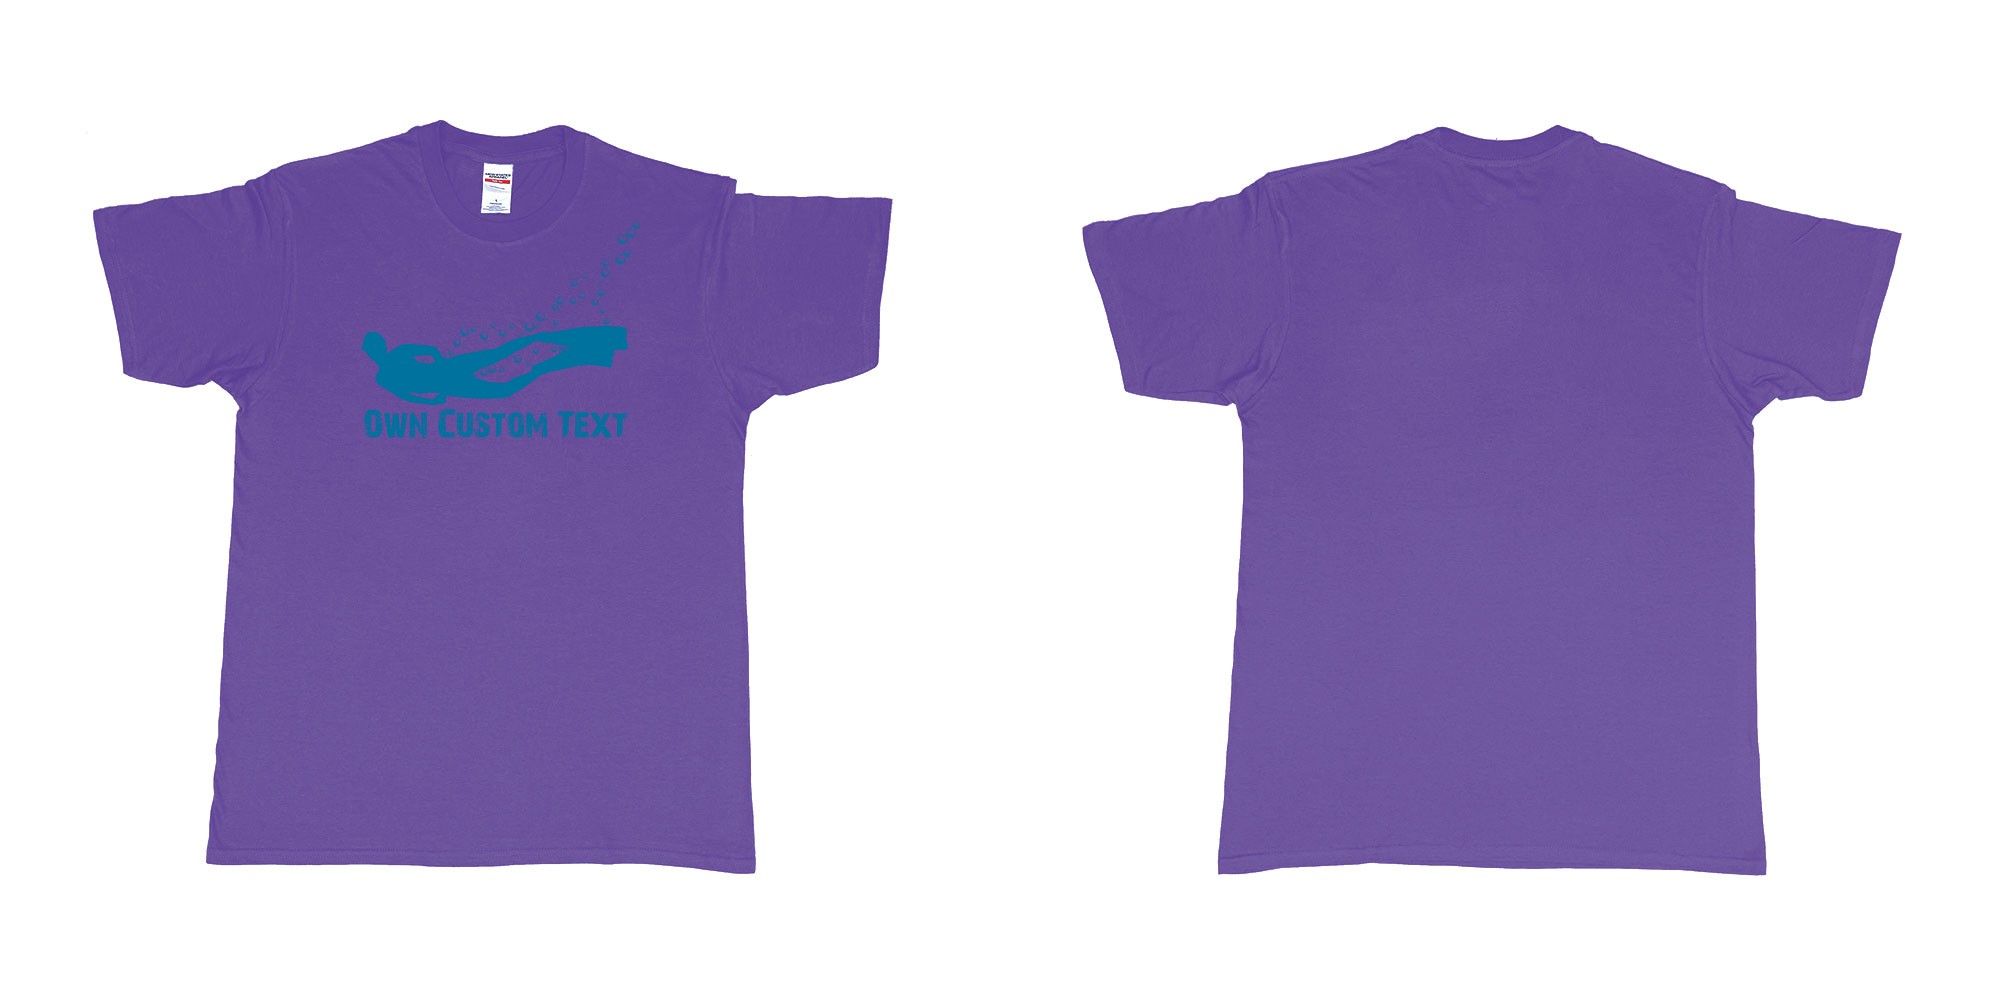 Custom tshirt design freediver bubbles in fabric color purple choice your own text made in Bali by The Pirate Way